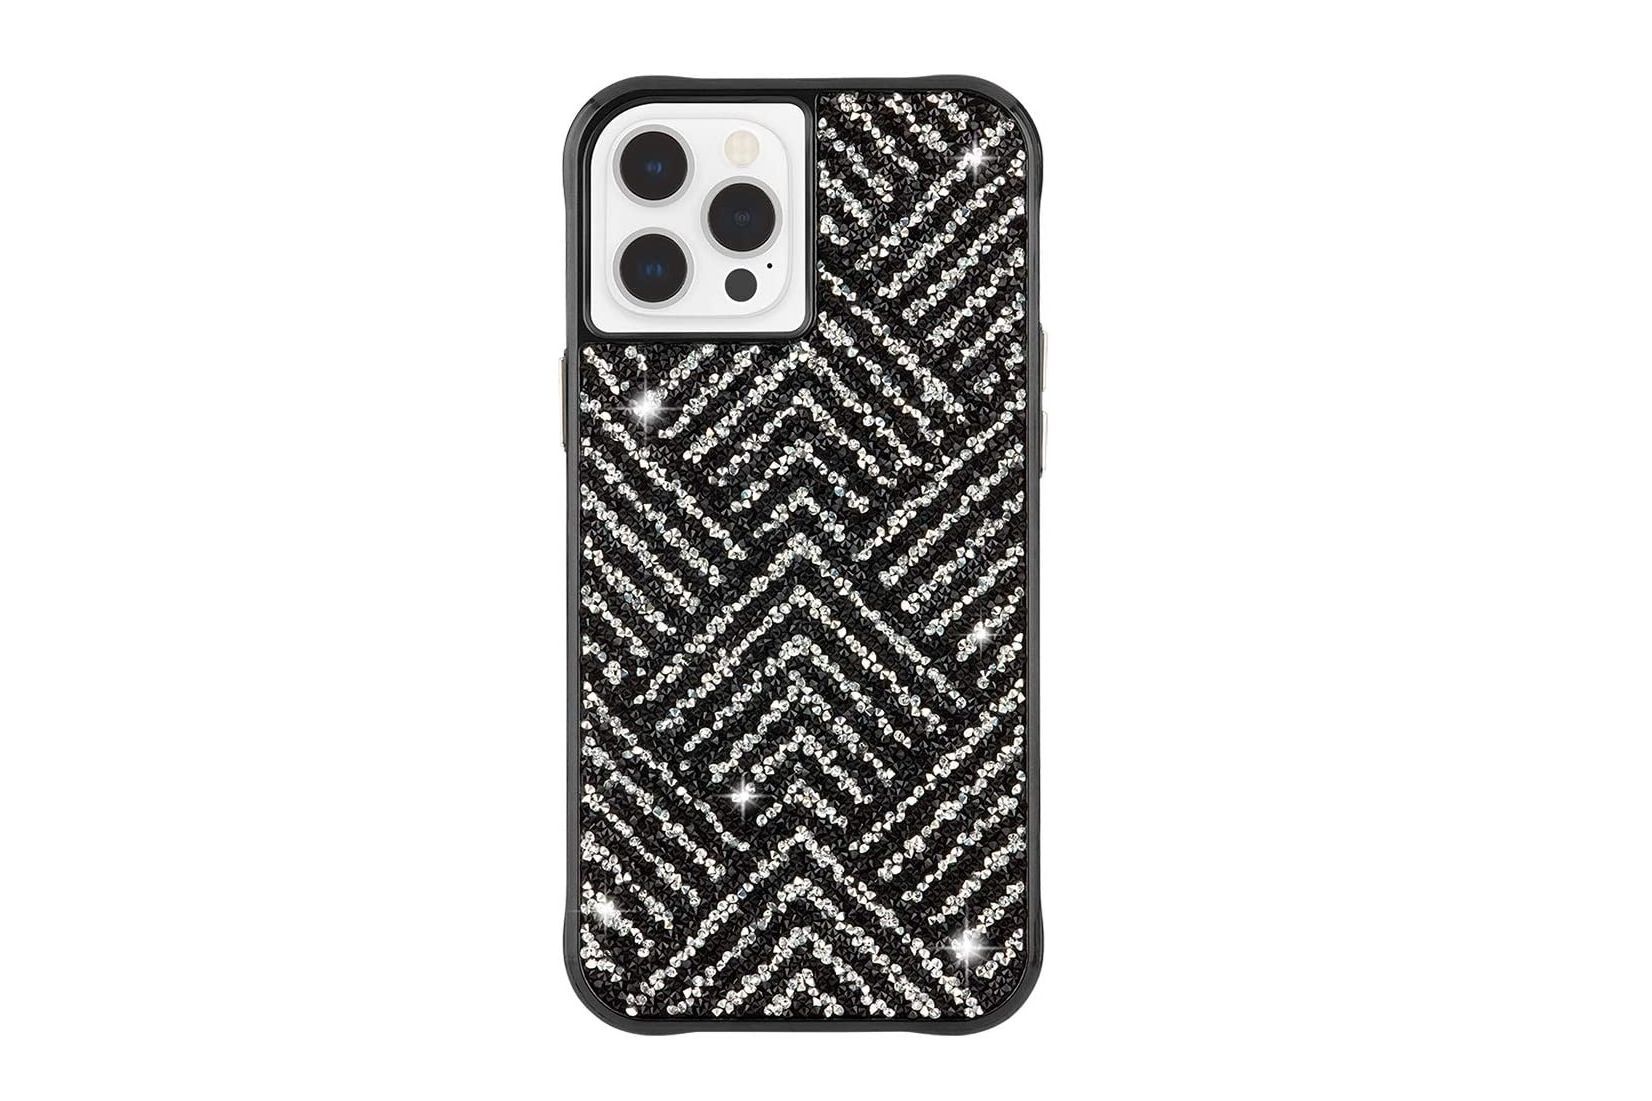 Case-Mate- Brilliance - Case for iPhone 12 Pro Max - The best iPhone 12 Pro Max cases - our top list